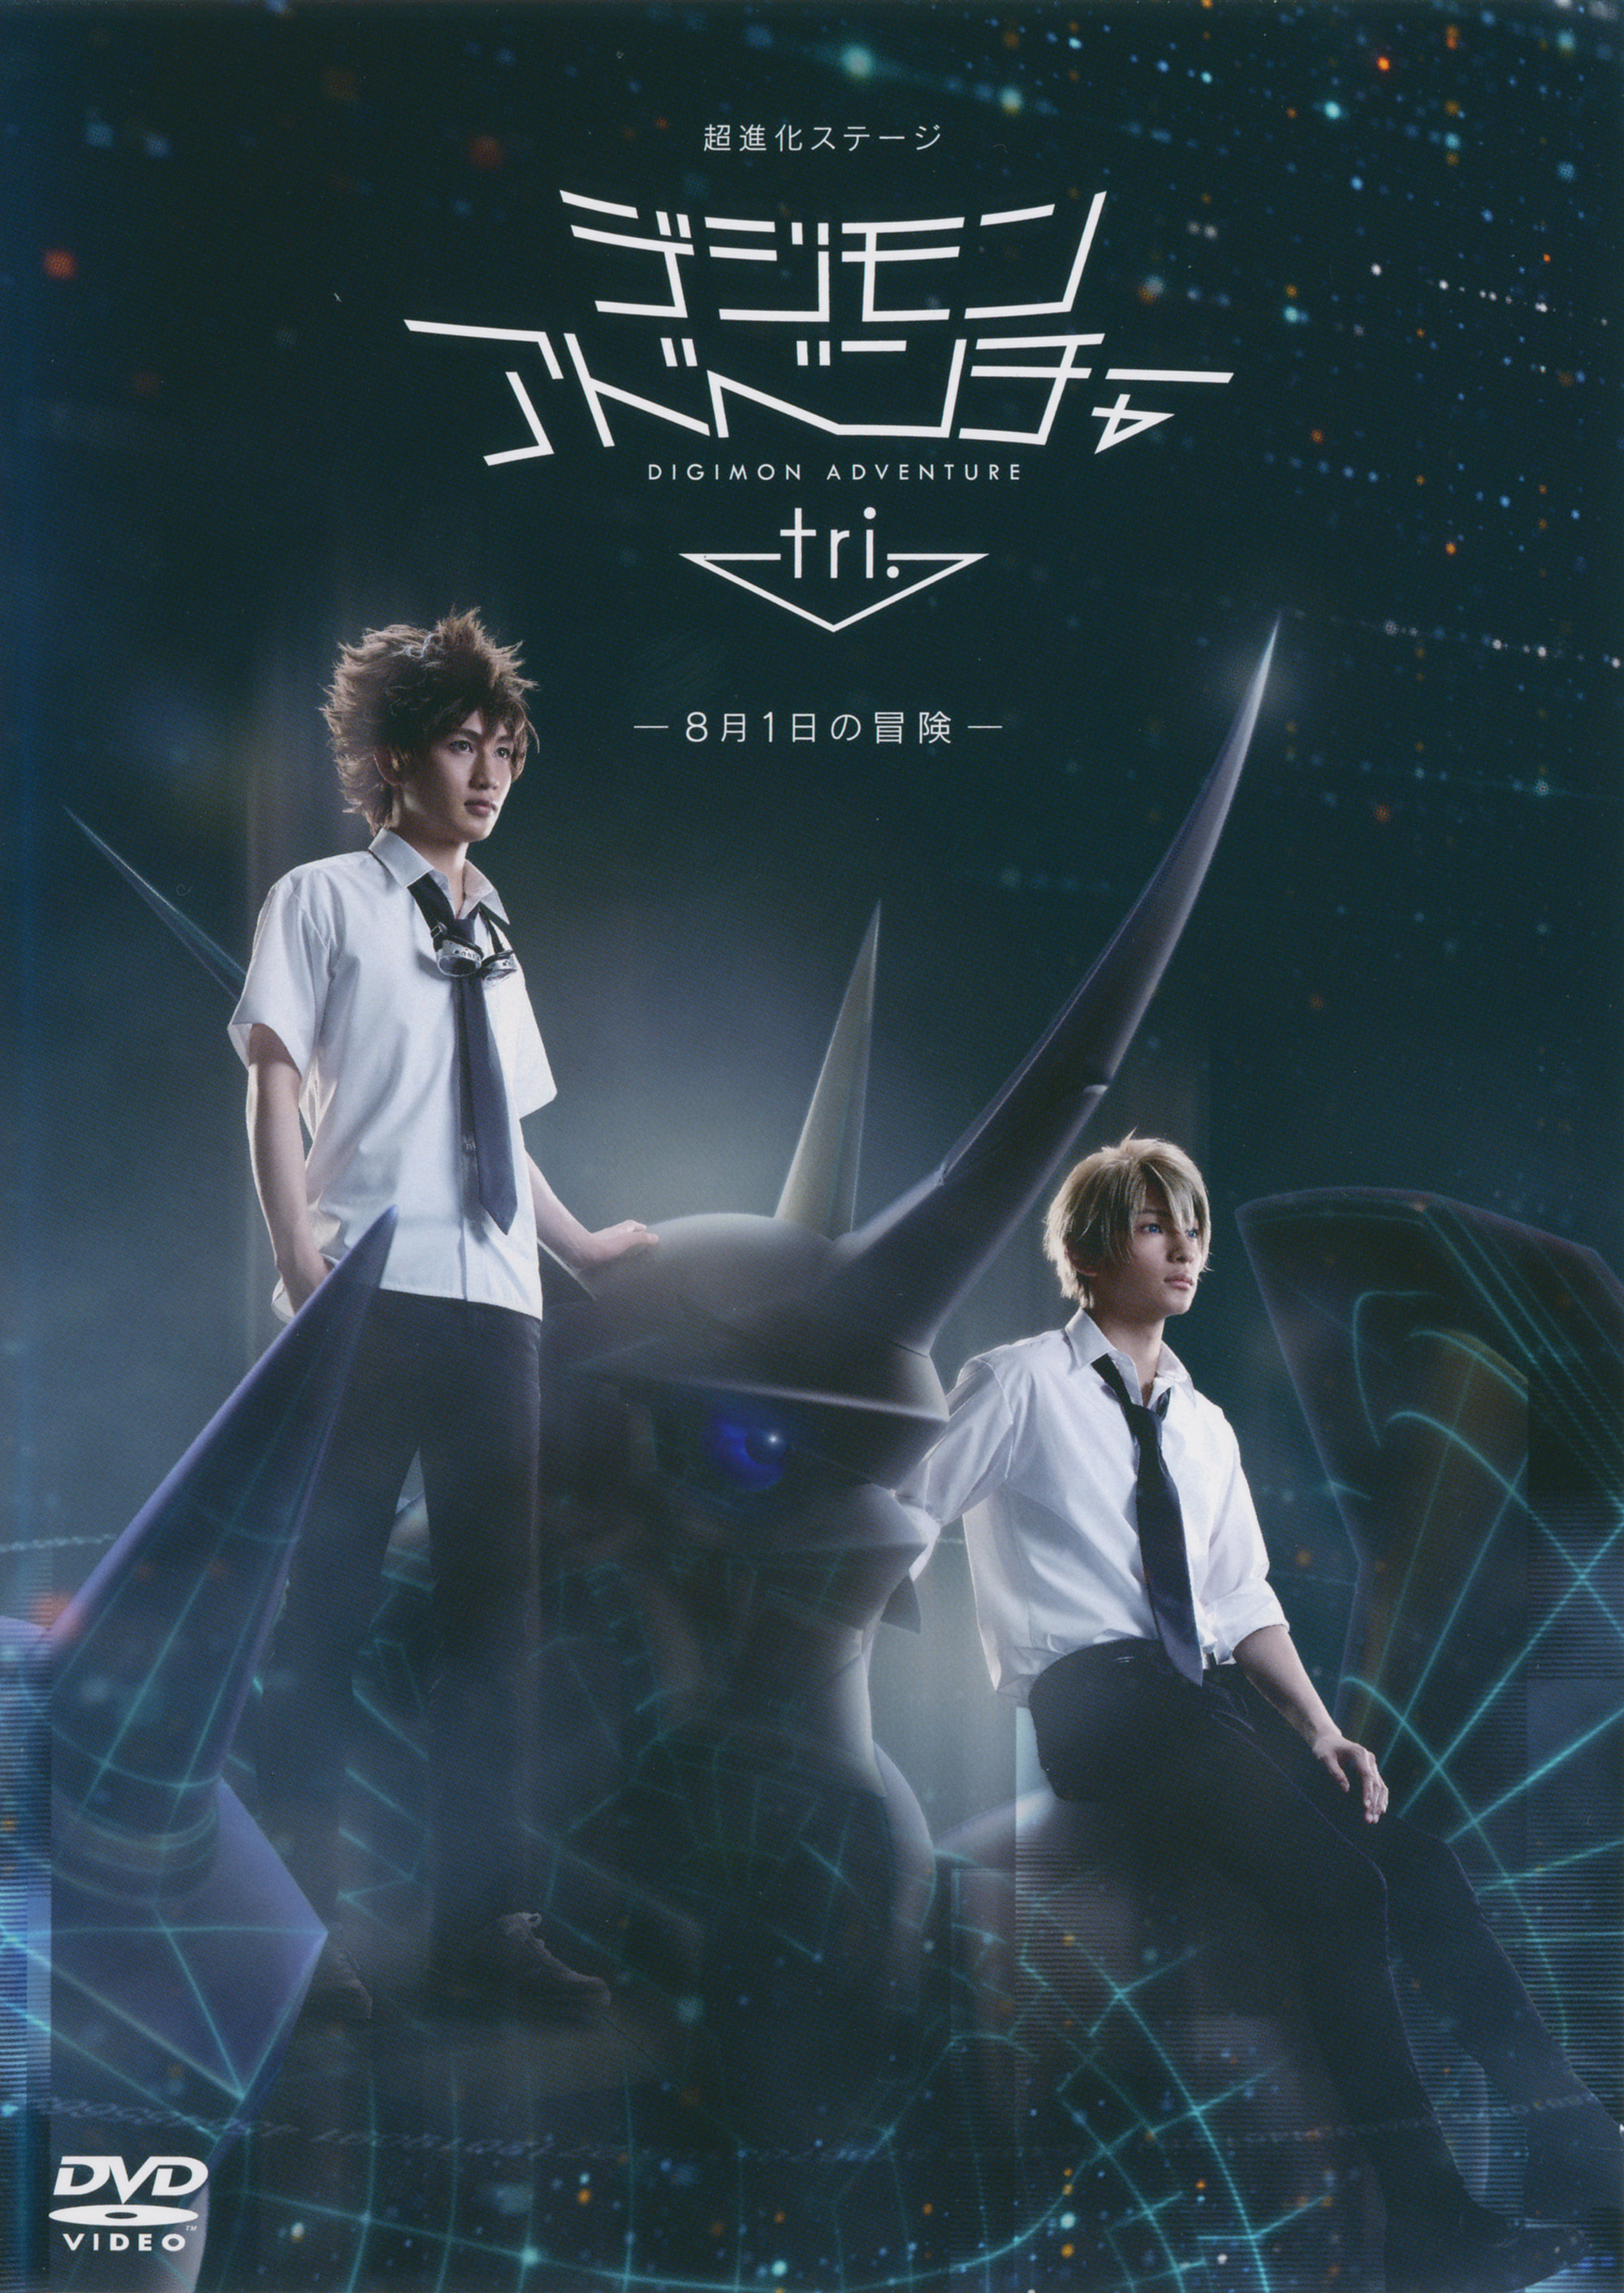 The Digimon Adventure Tri Stage Play Is Out On Dvd Breakdown Scans And Screencaps With The Will Digimon Forums